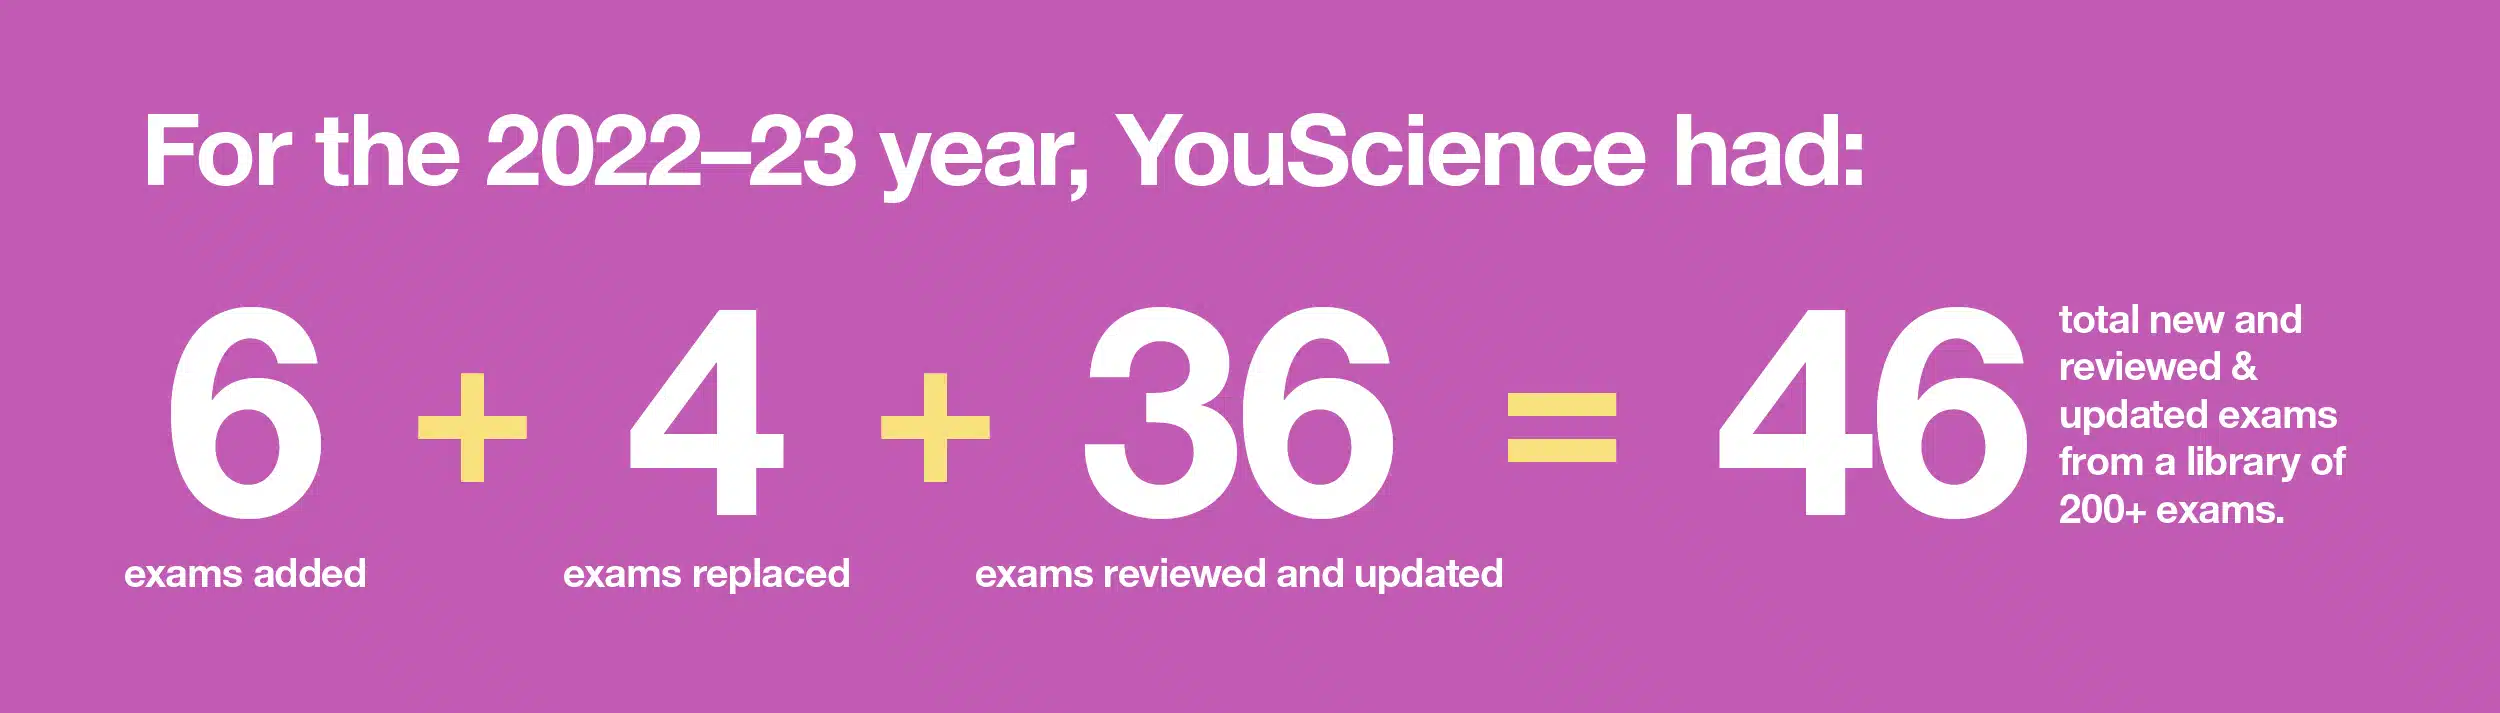 Image summarizes new, reviewed and updated Precision Exams for 2022-23 for a total of 46